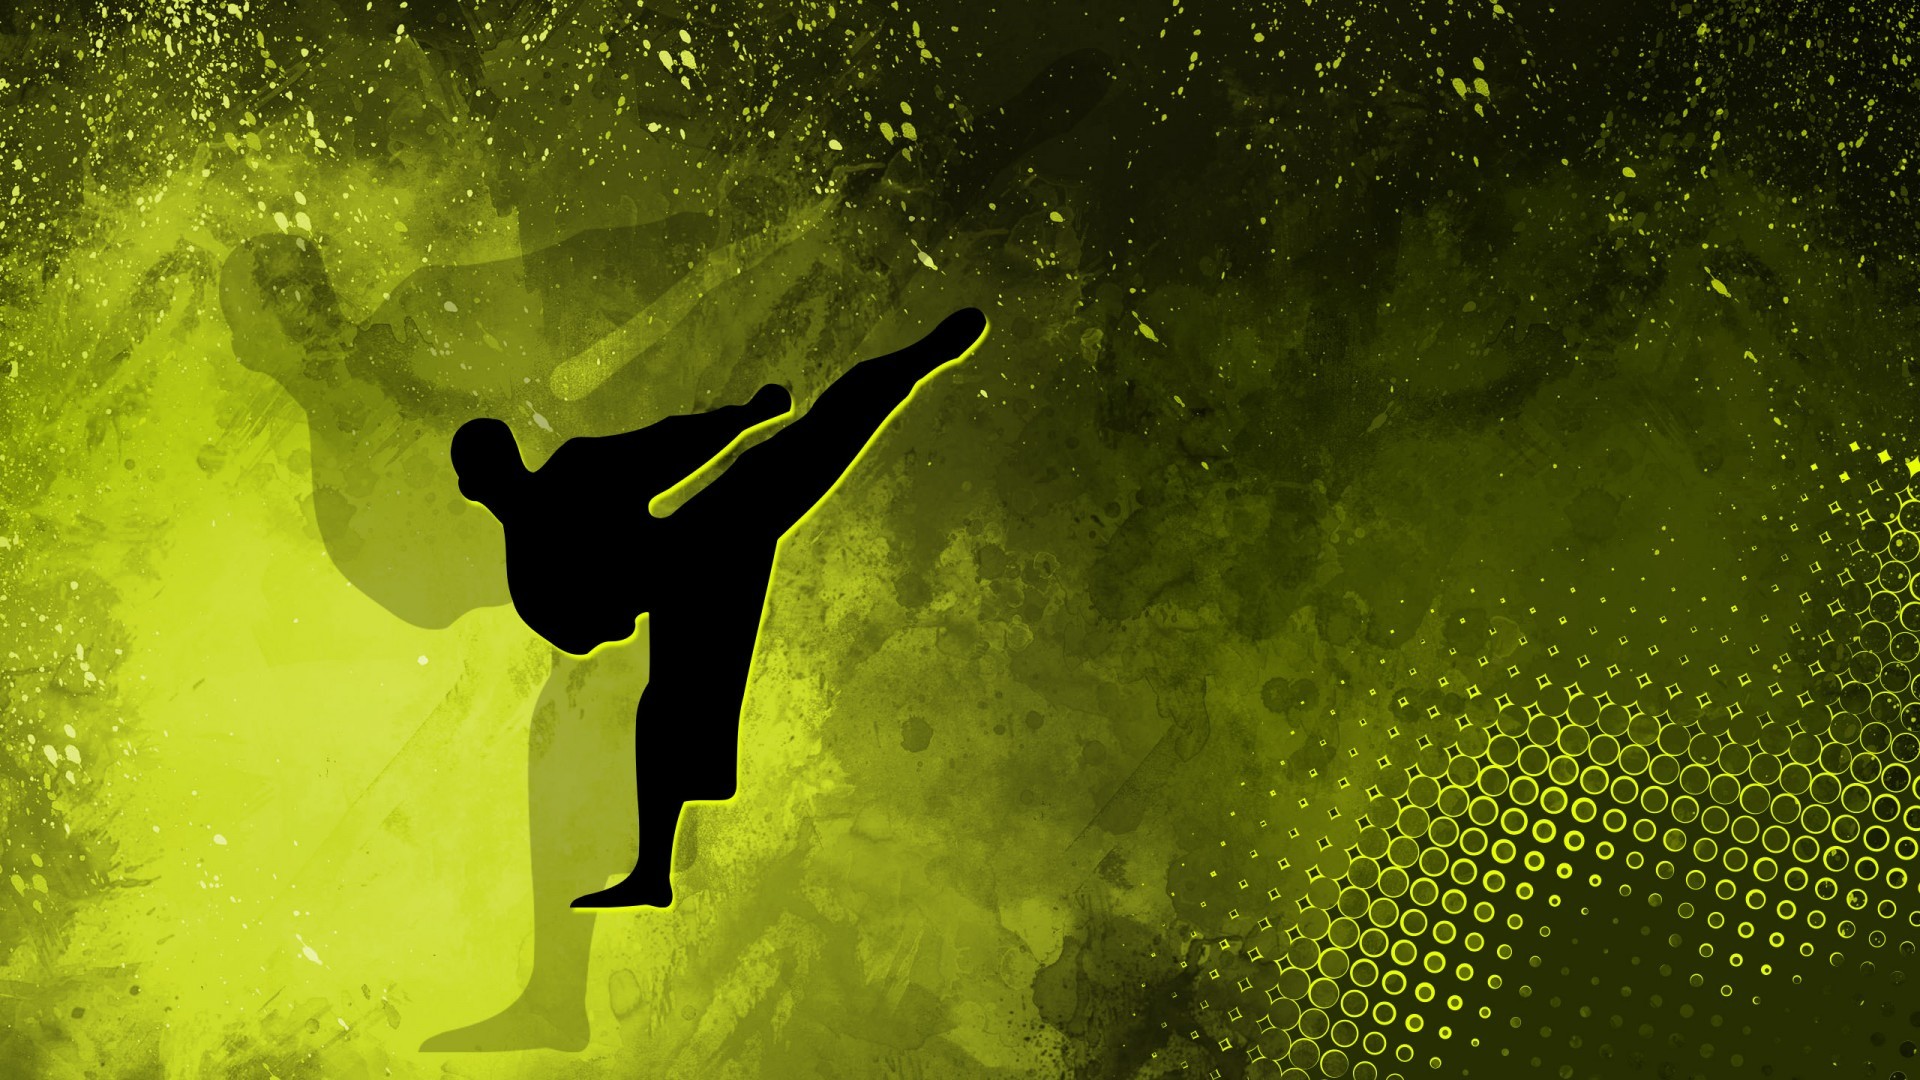 Simple Retro Ink Martial Arts Material H5 Background Wallpaper Image For  Free Download  Pngtree